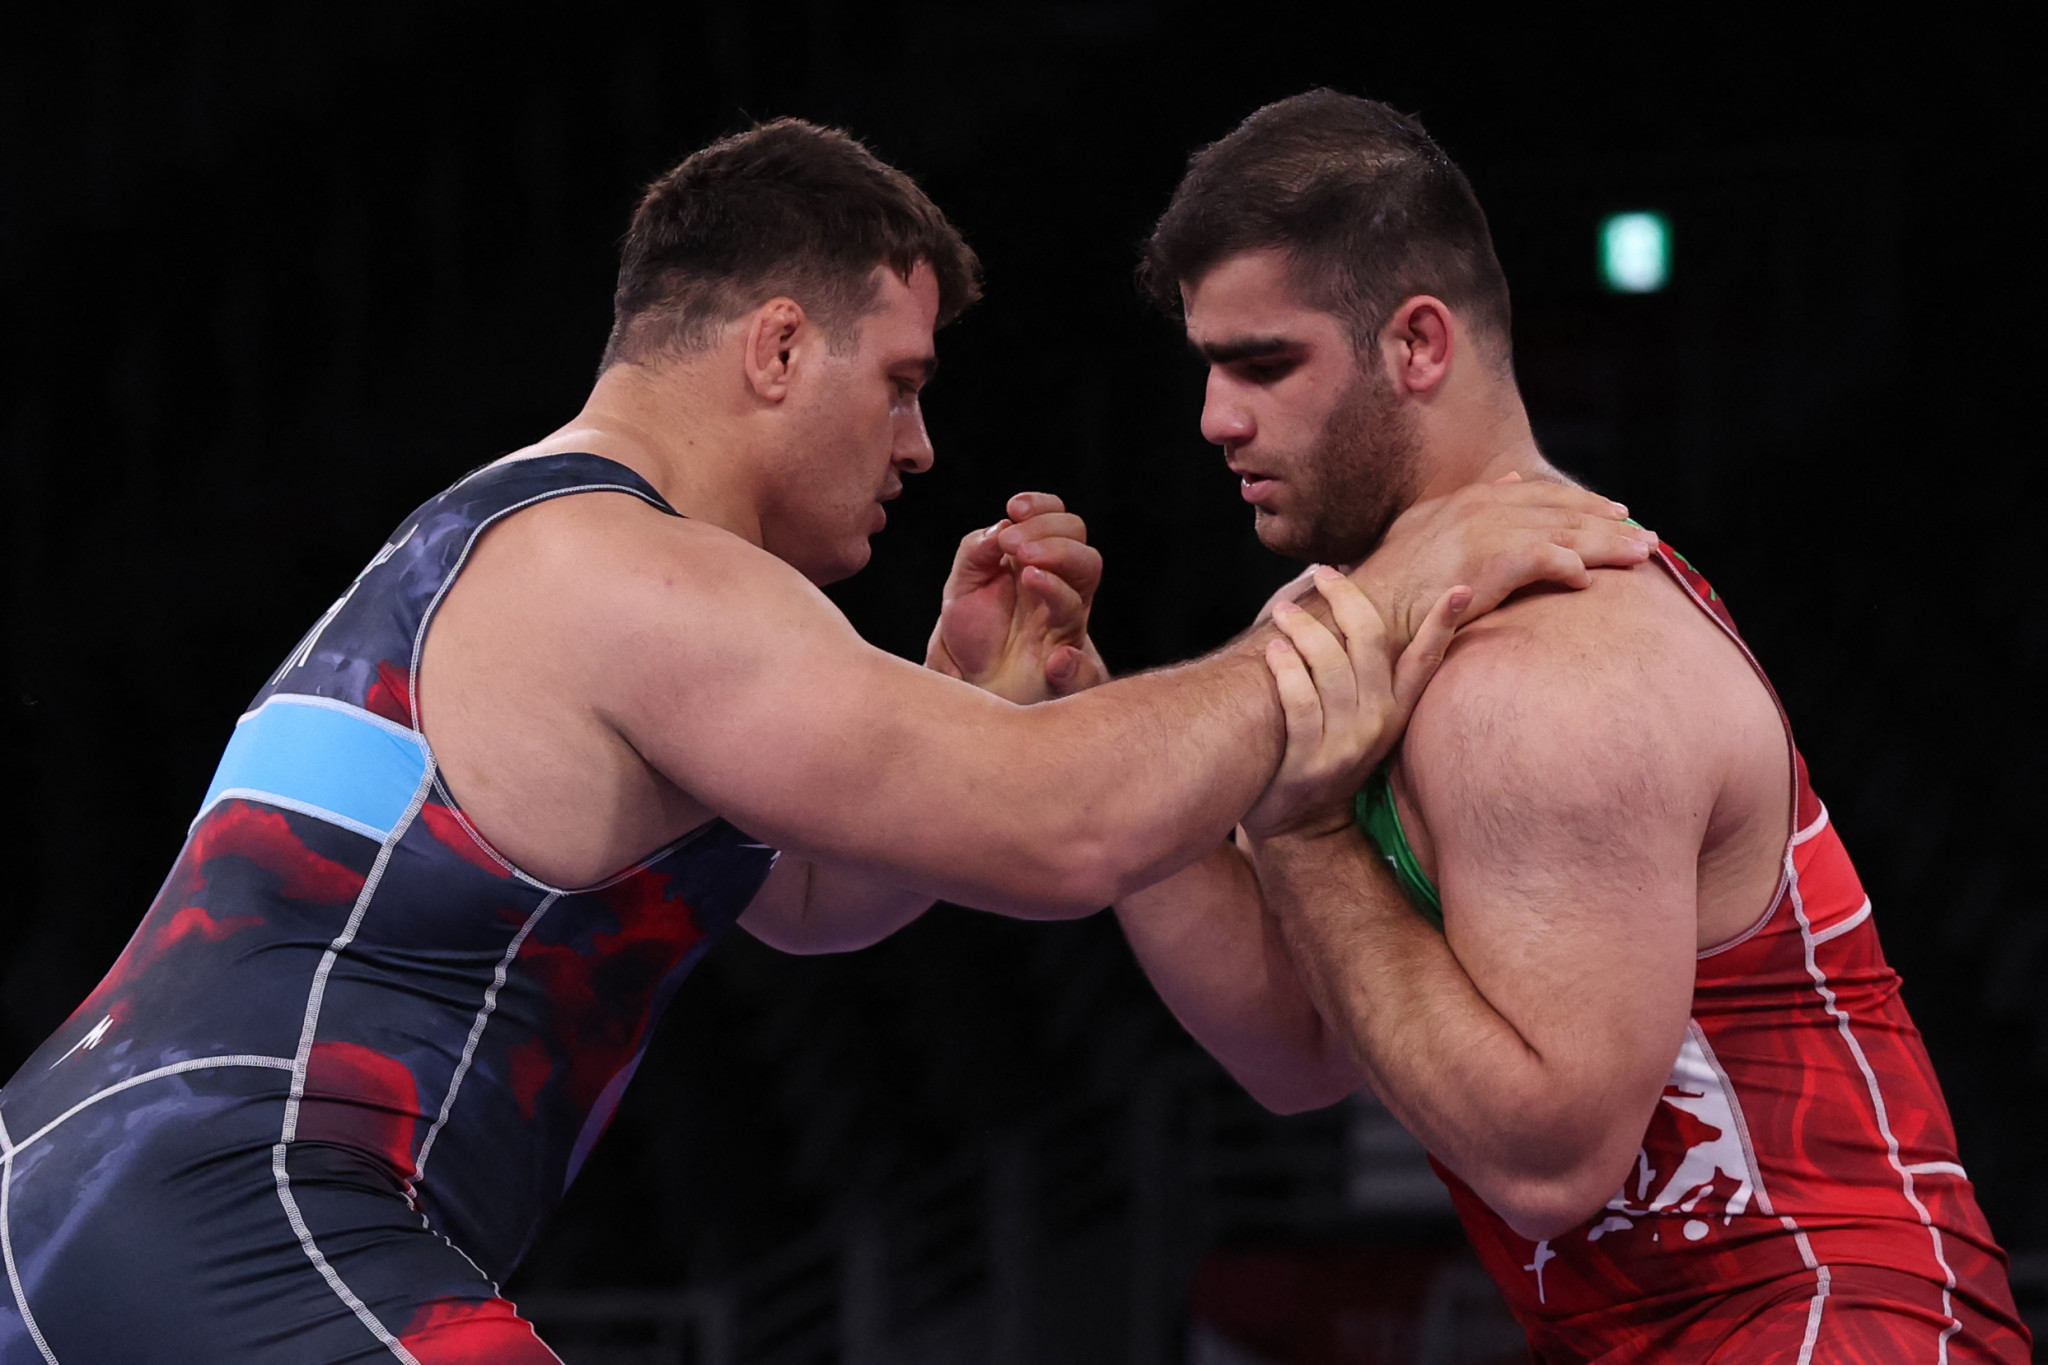 Amin Mirzazadeh, right, won gold in the under-130kg category at the UWW Under-23 World Championships in Belgrade ©Getty Images 